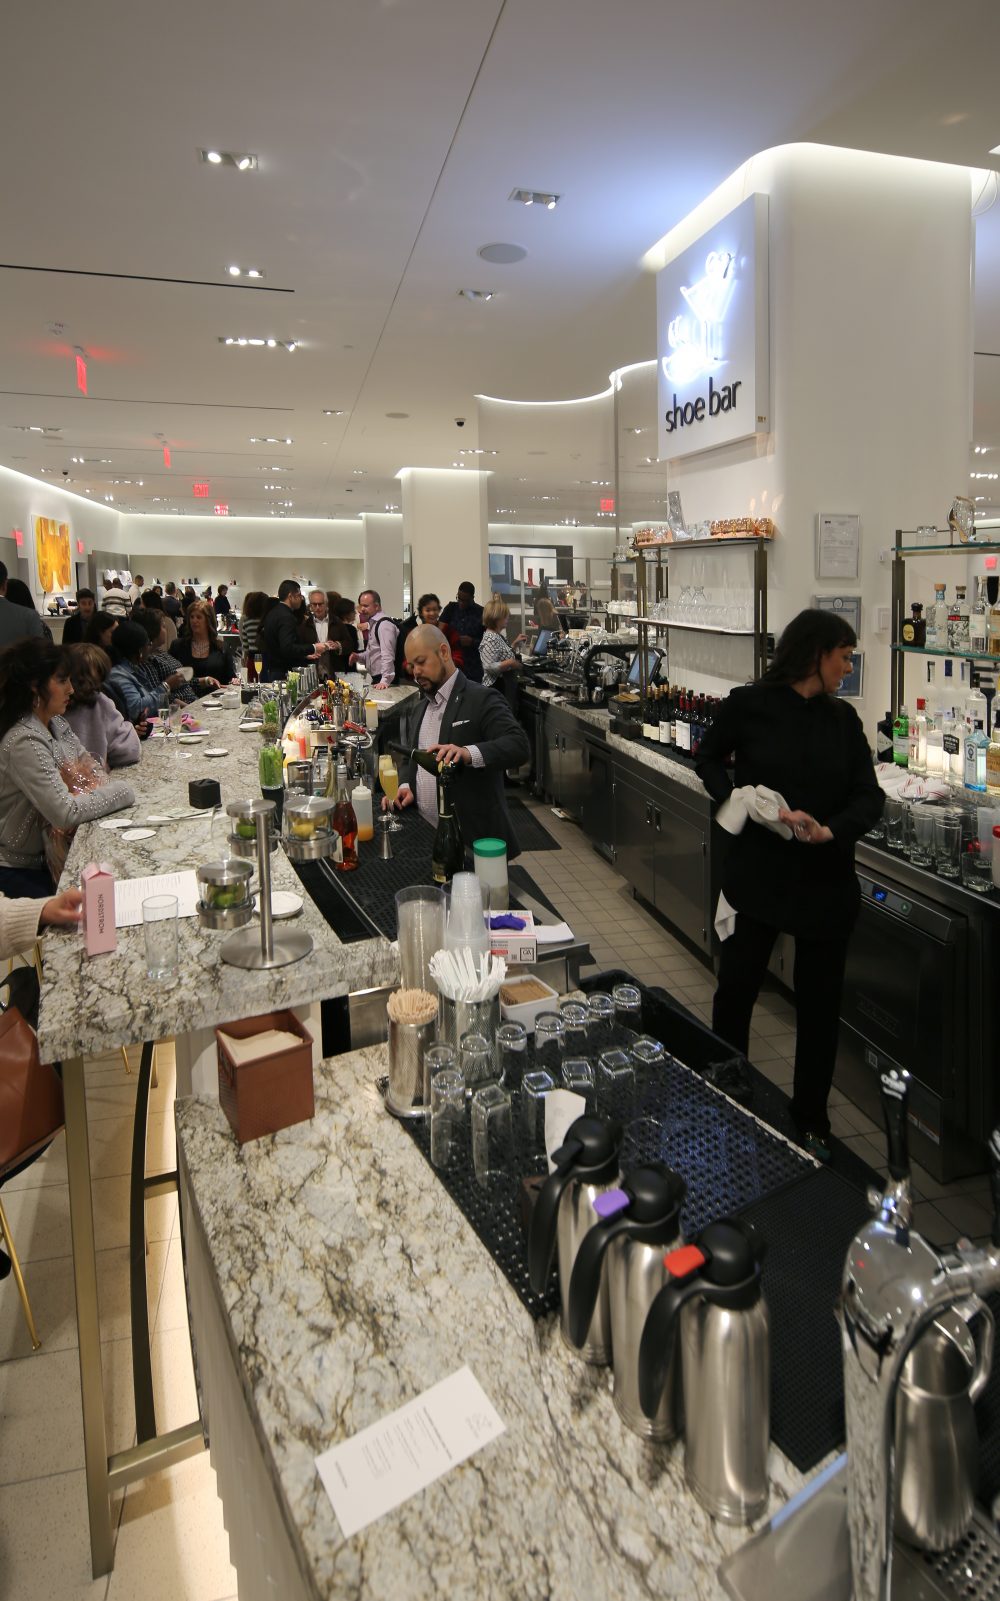 THE OPENING OF THE NYC NORDSTROM FLAGSHIP STORE - Girvin